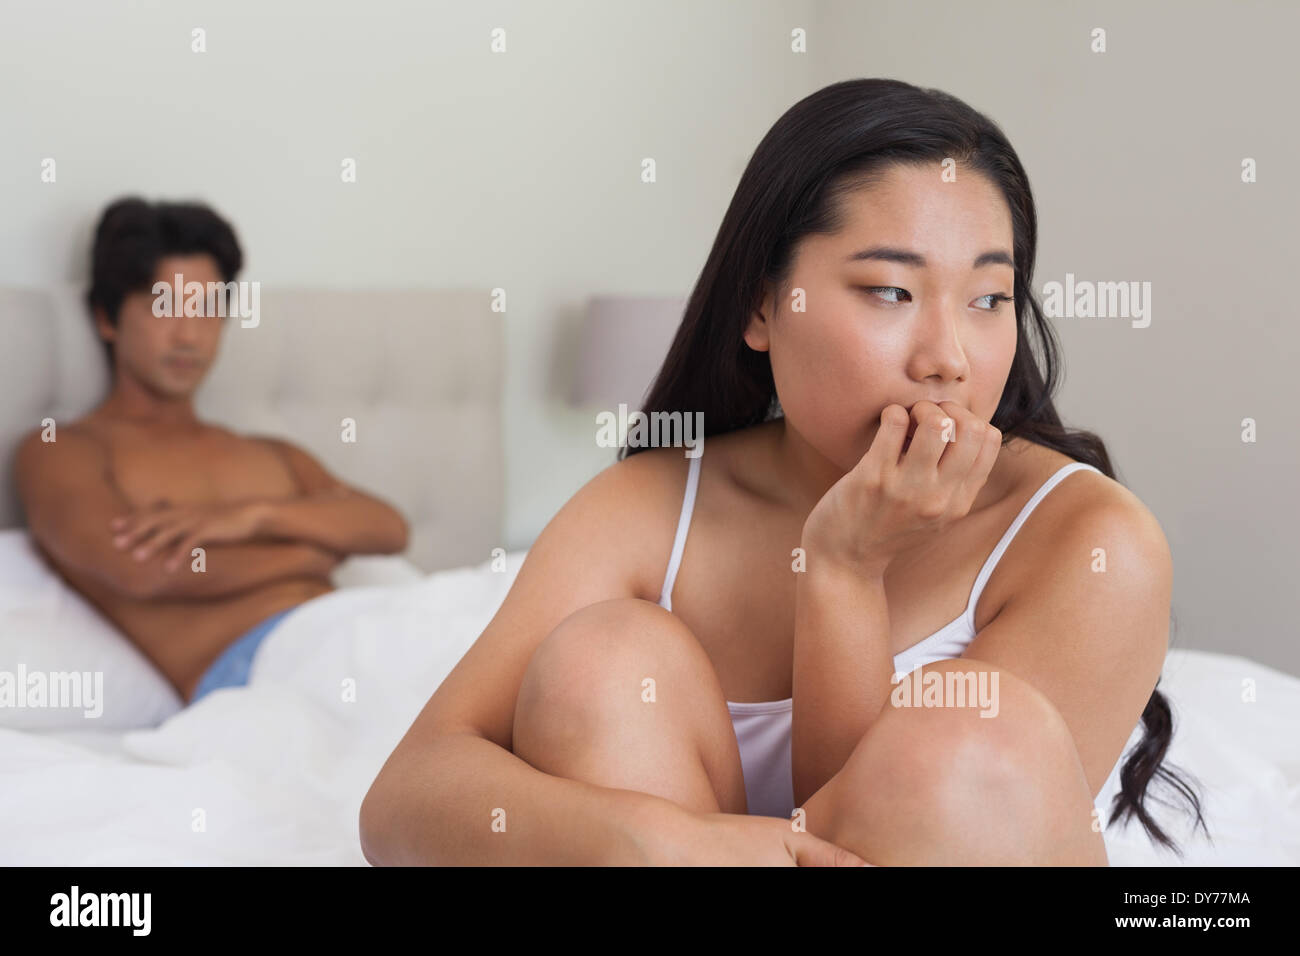 Boyfriend looking at upset girlfriend sitting on end of bed Stock Photo